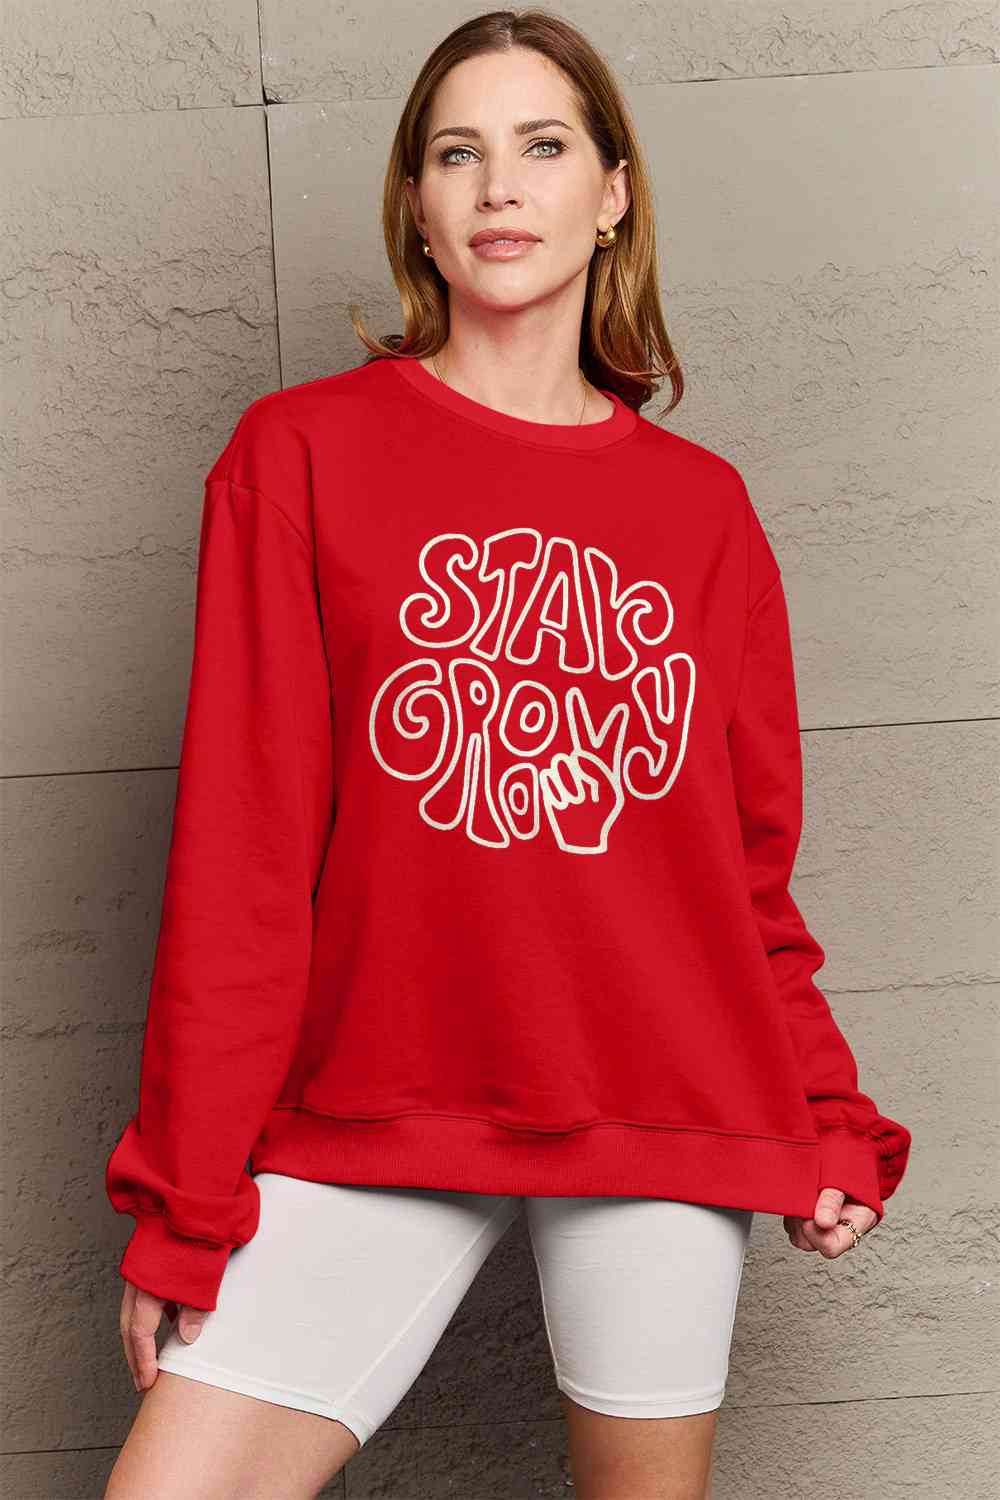 Simply Love Full Size STAY GROWN Graphic Sweatshirt